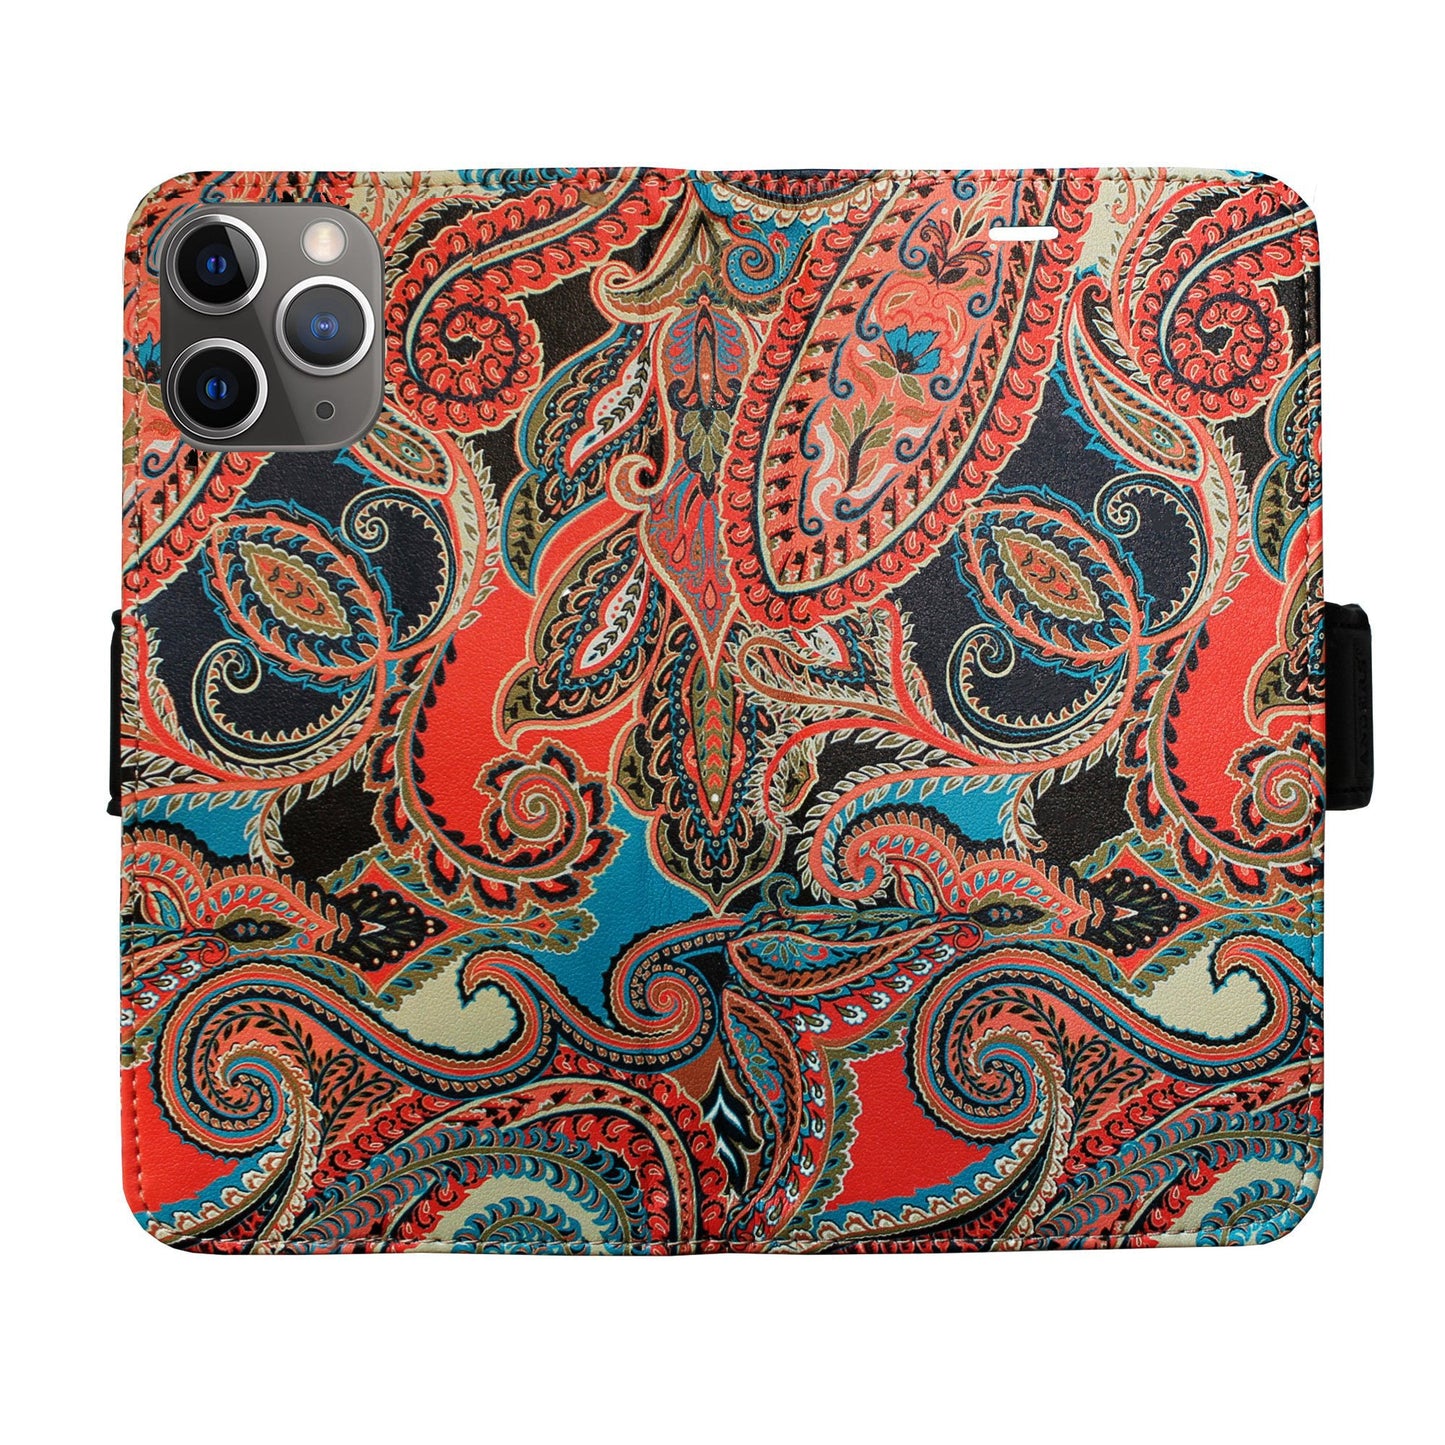 Paisley Victor case for iPhone 11 Pro Max